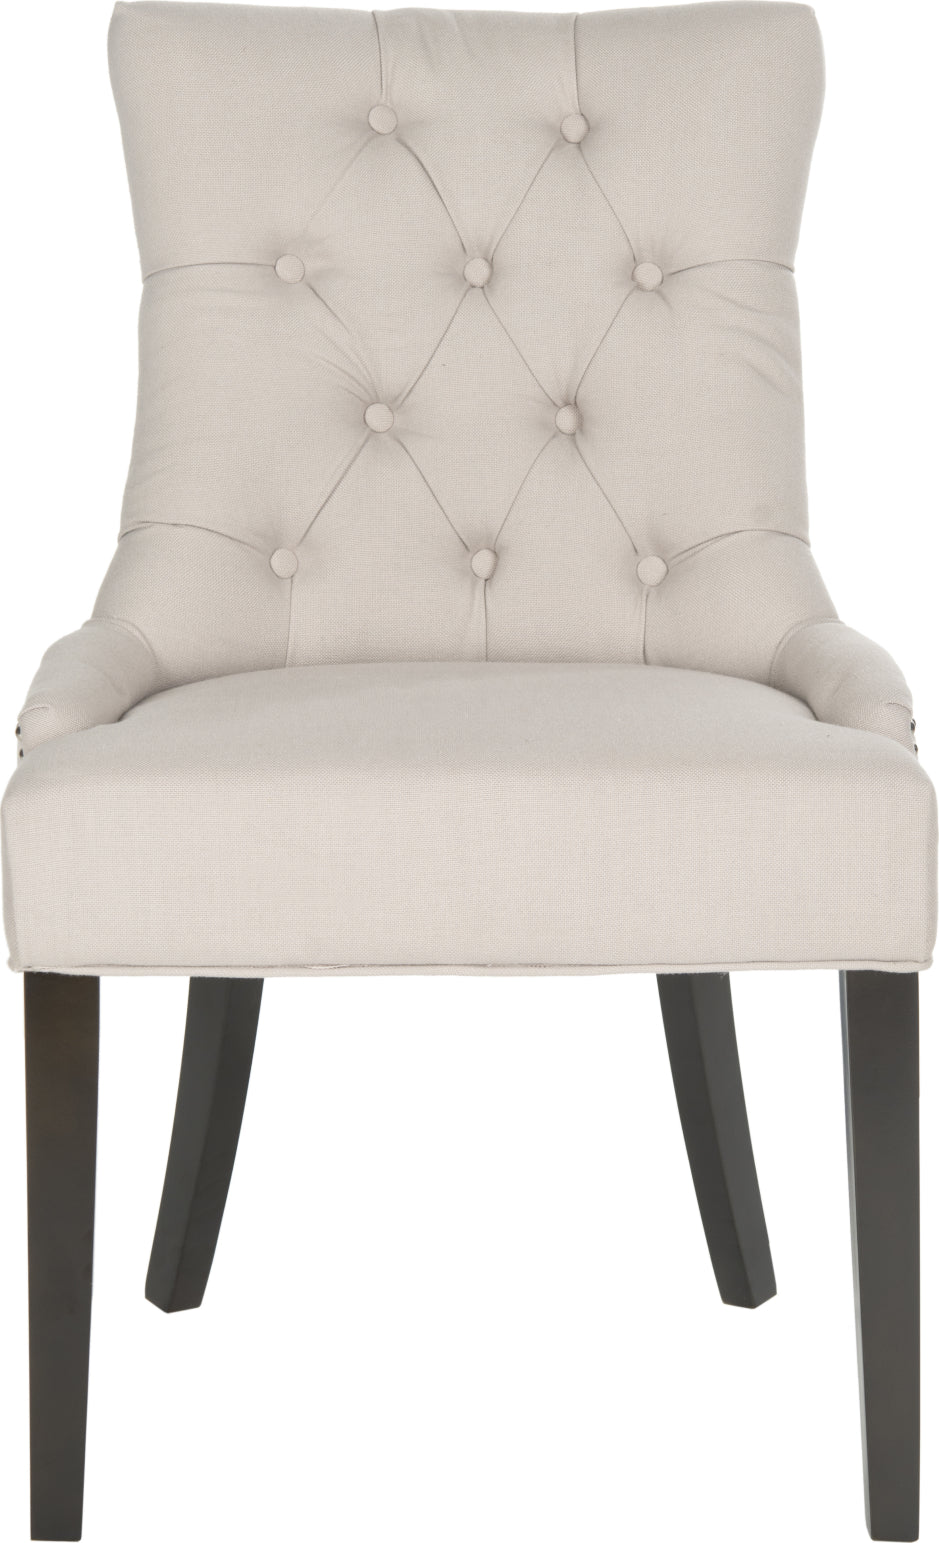 Safavieh Harlow 19''H Tufted Ring Chair (SET Of 2)-Silver Nail Heads Taupe and Espresso Furniture main image